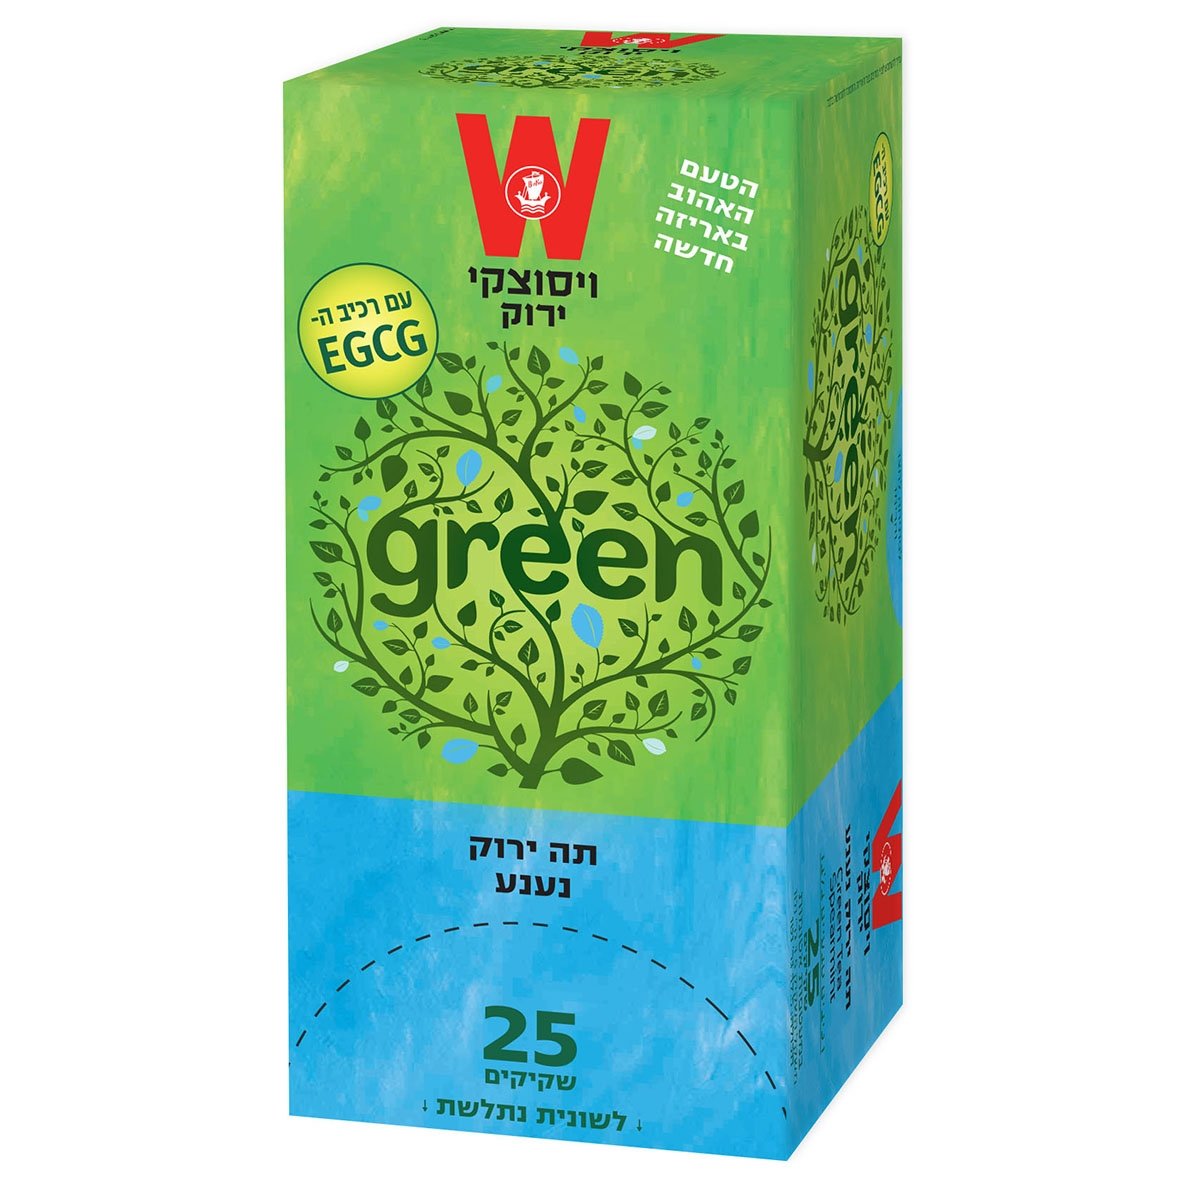 Wissotzky Green Tea with Spearmint Leaves - 1